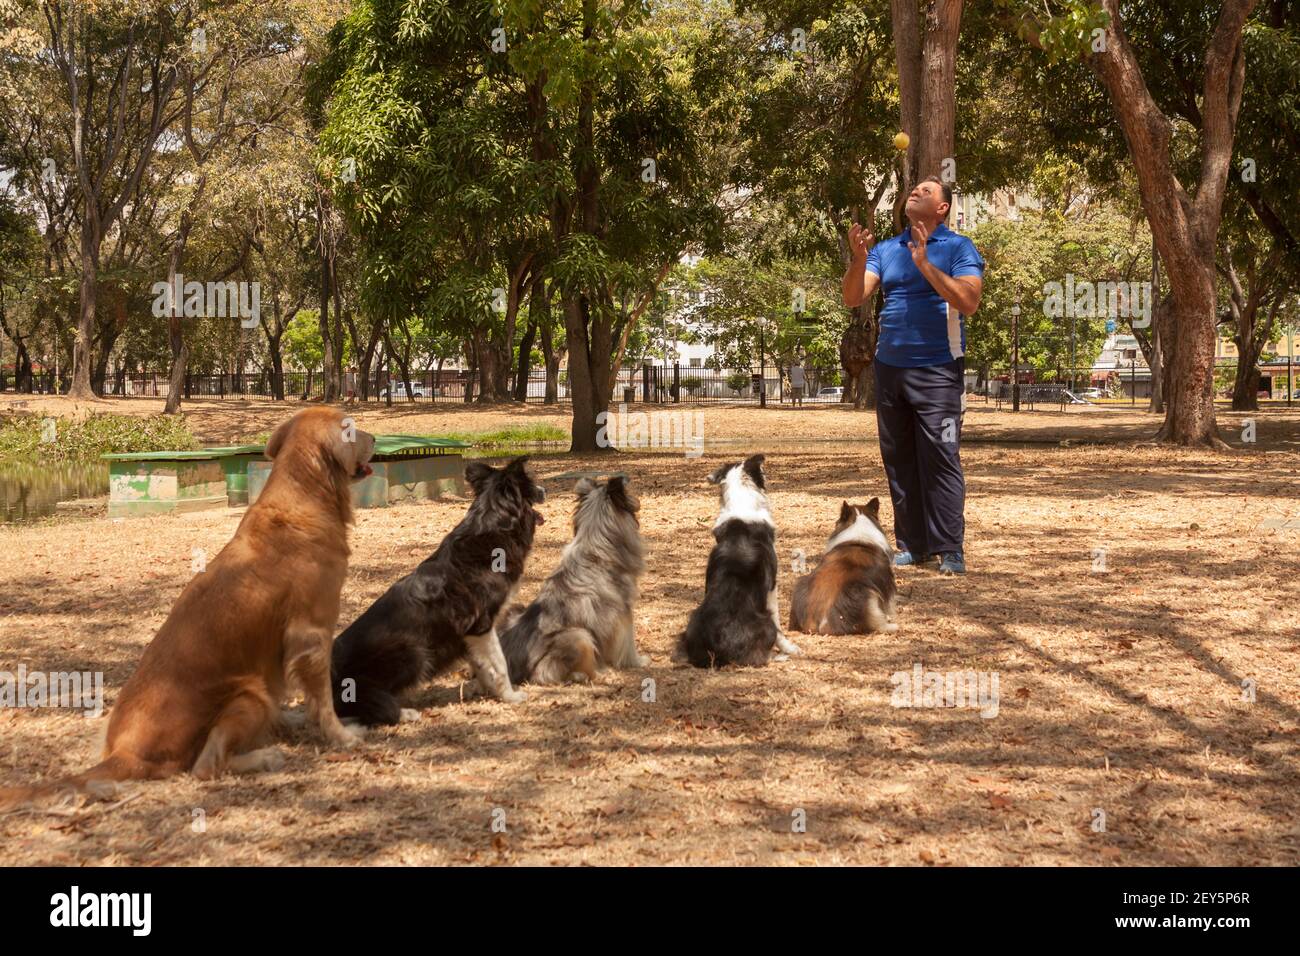 Dog trainer with border collie, shetland shepherd and golden retriever dogs Stock Photo